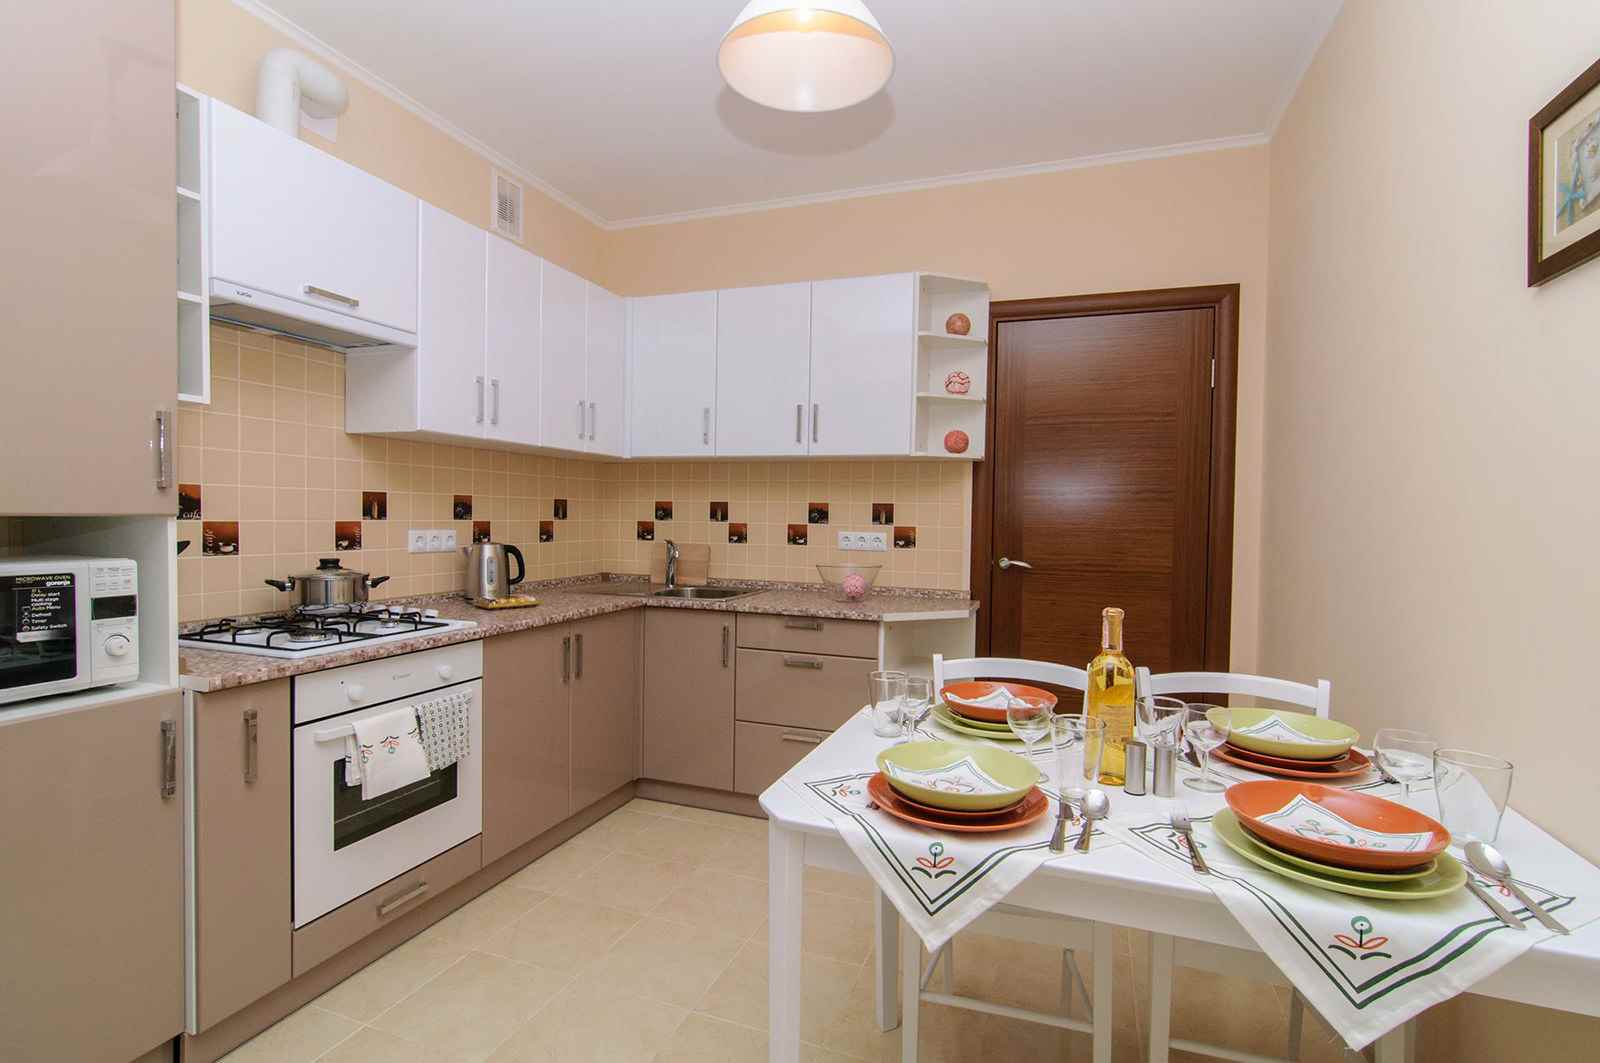 An example of the bright style of the kitchen is 10 sq.m. n series 44